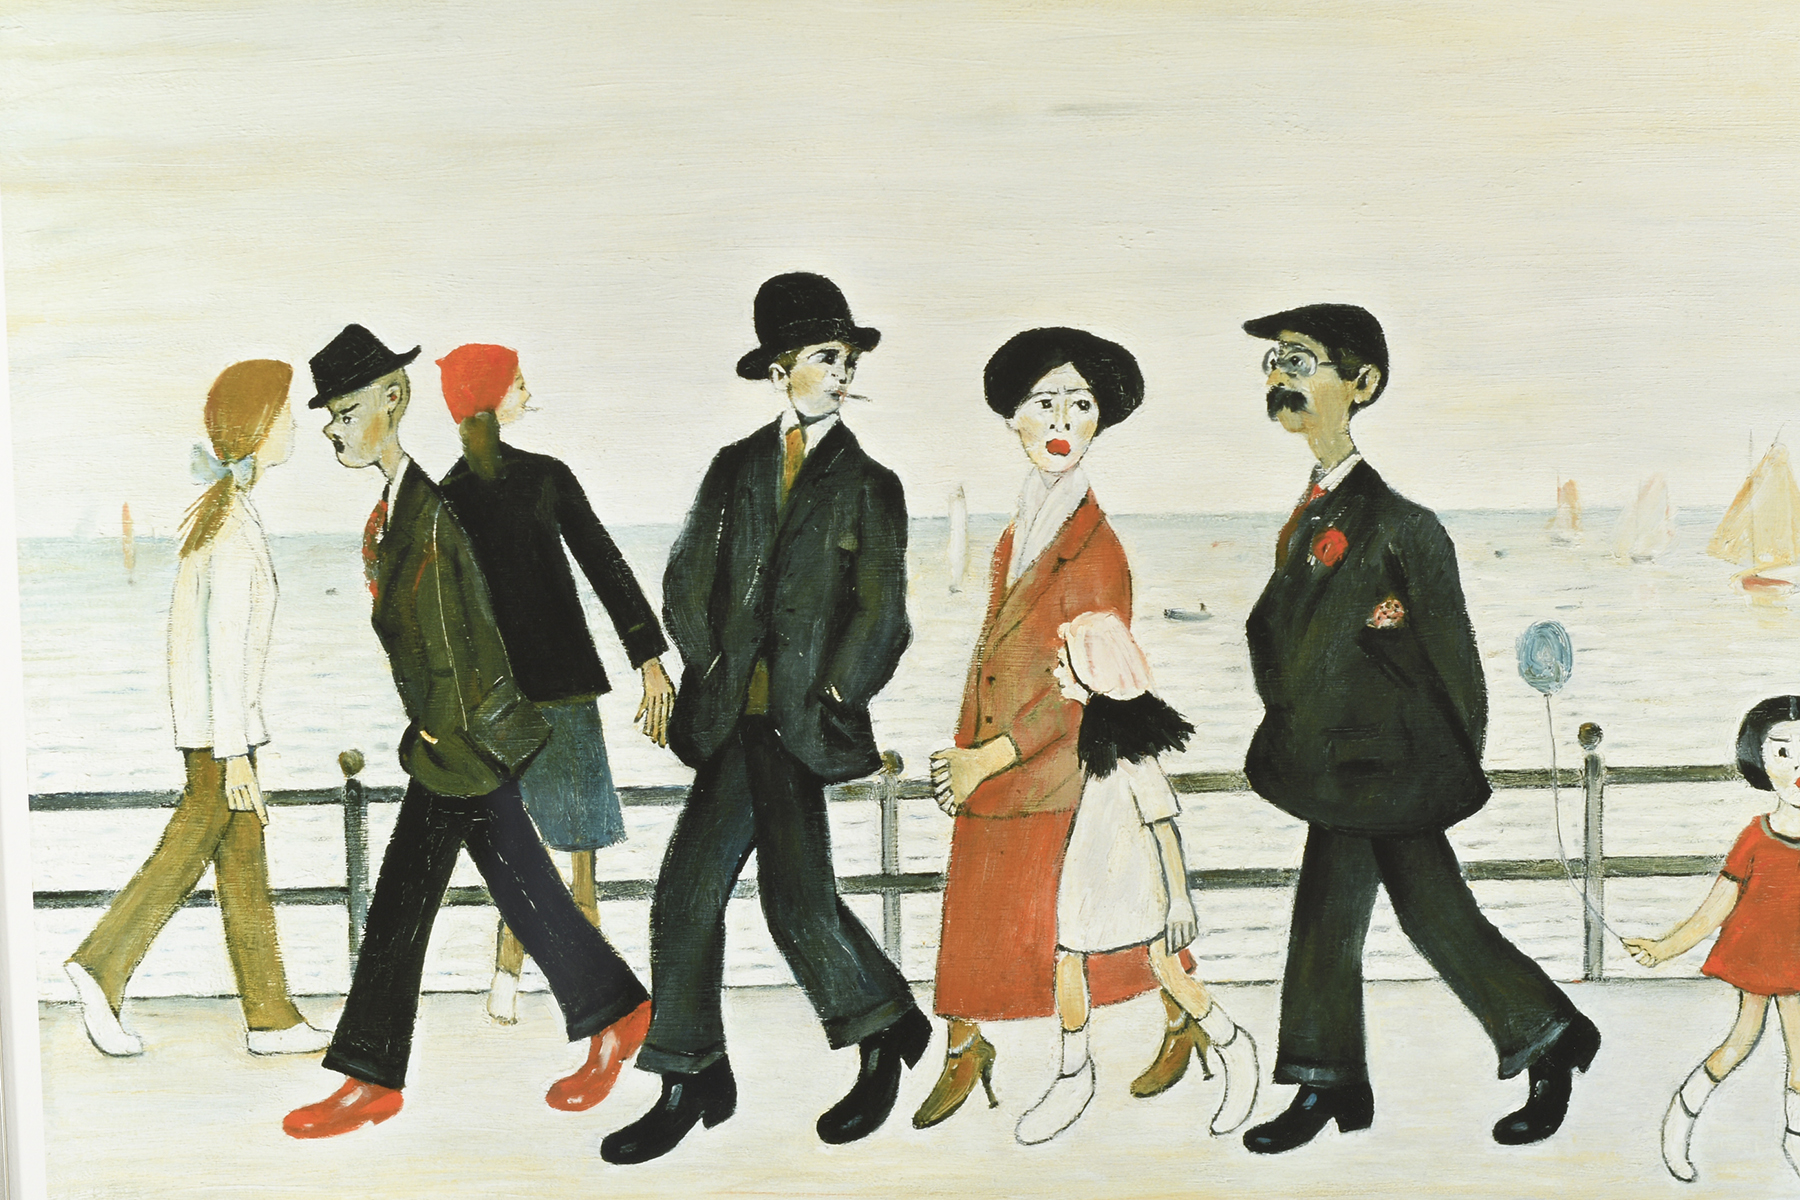 Limited Edition L.S. Lowry ""On The Promenade"" - Image 10 of 12